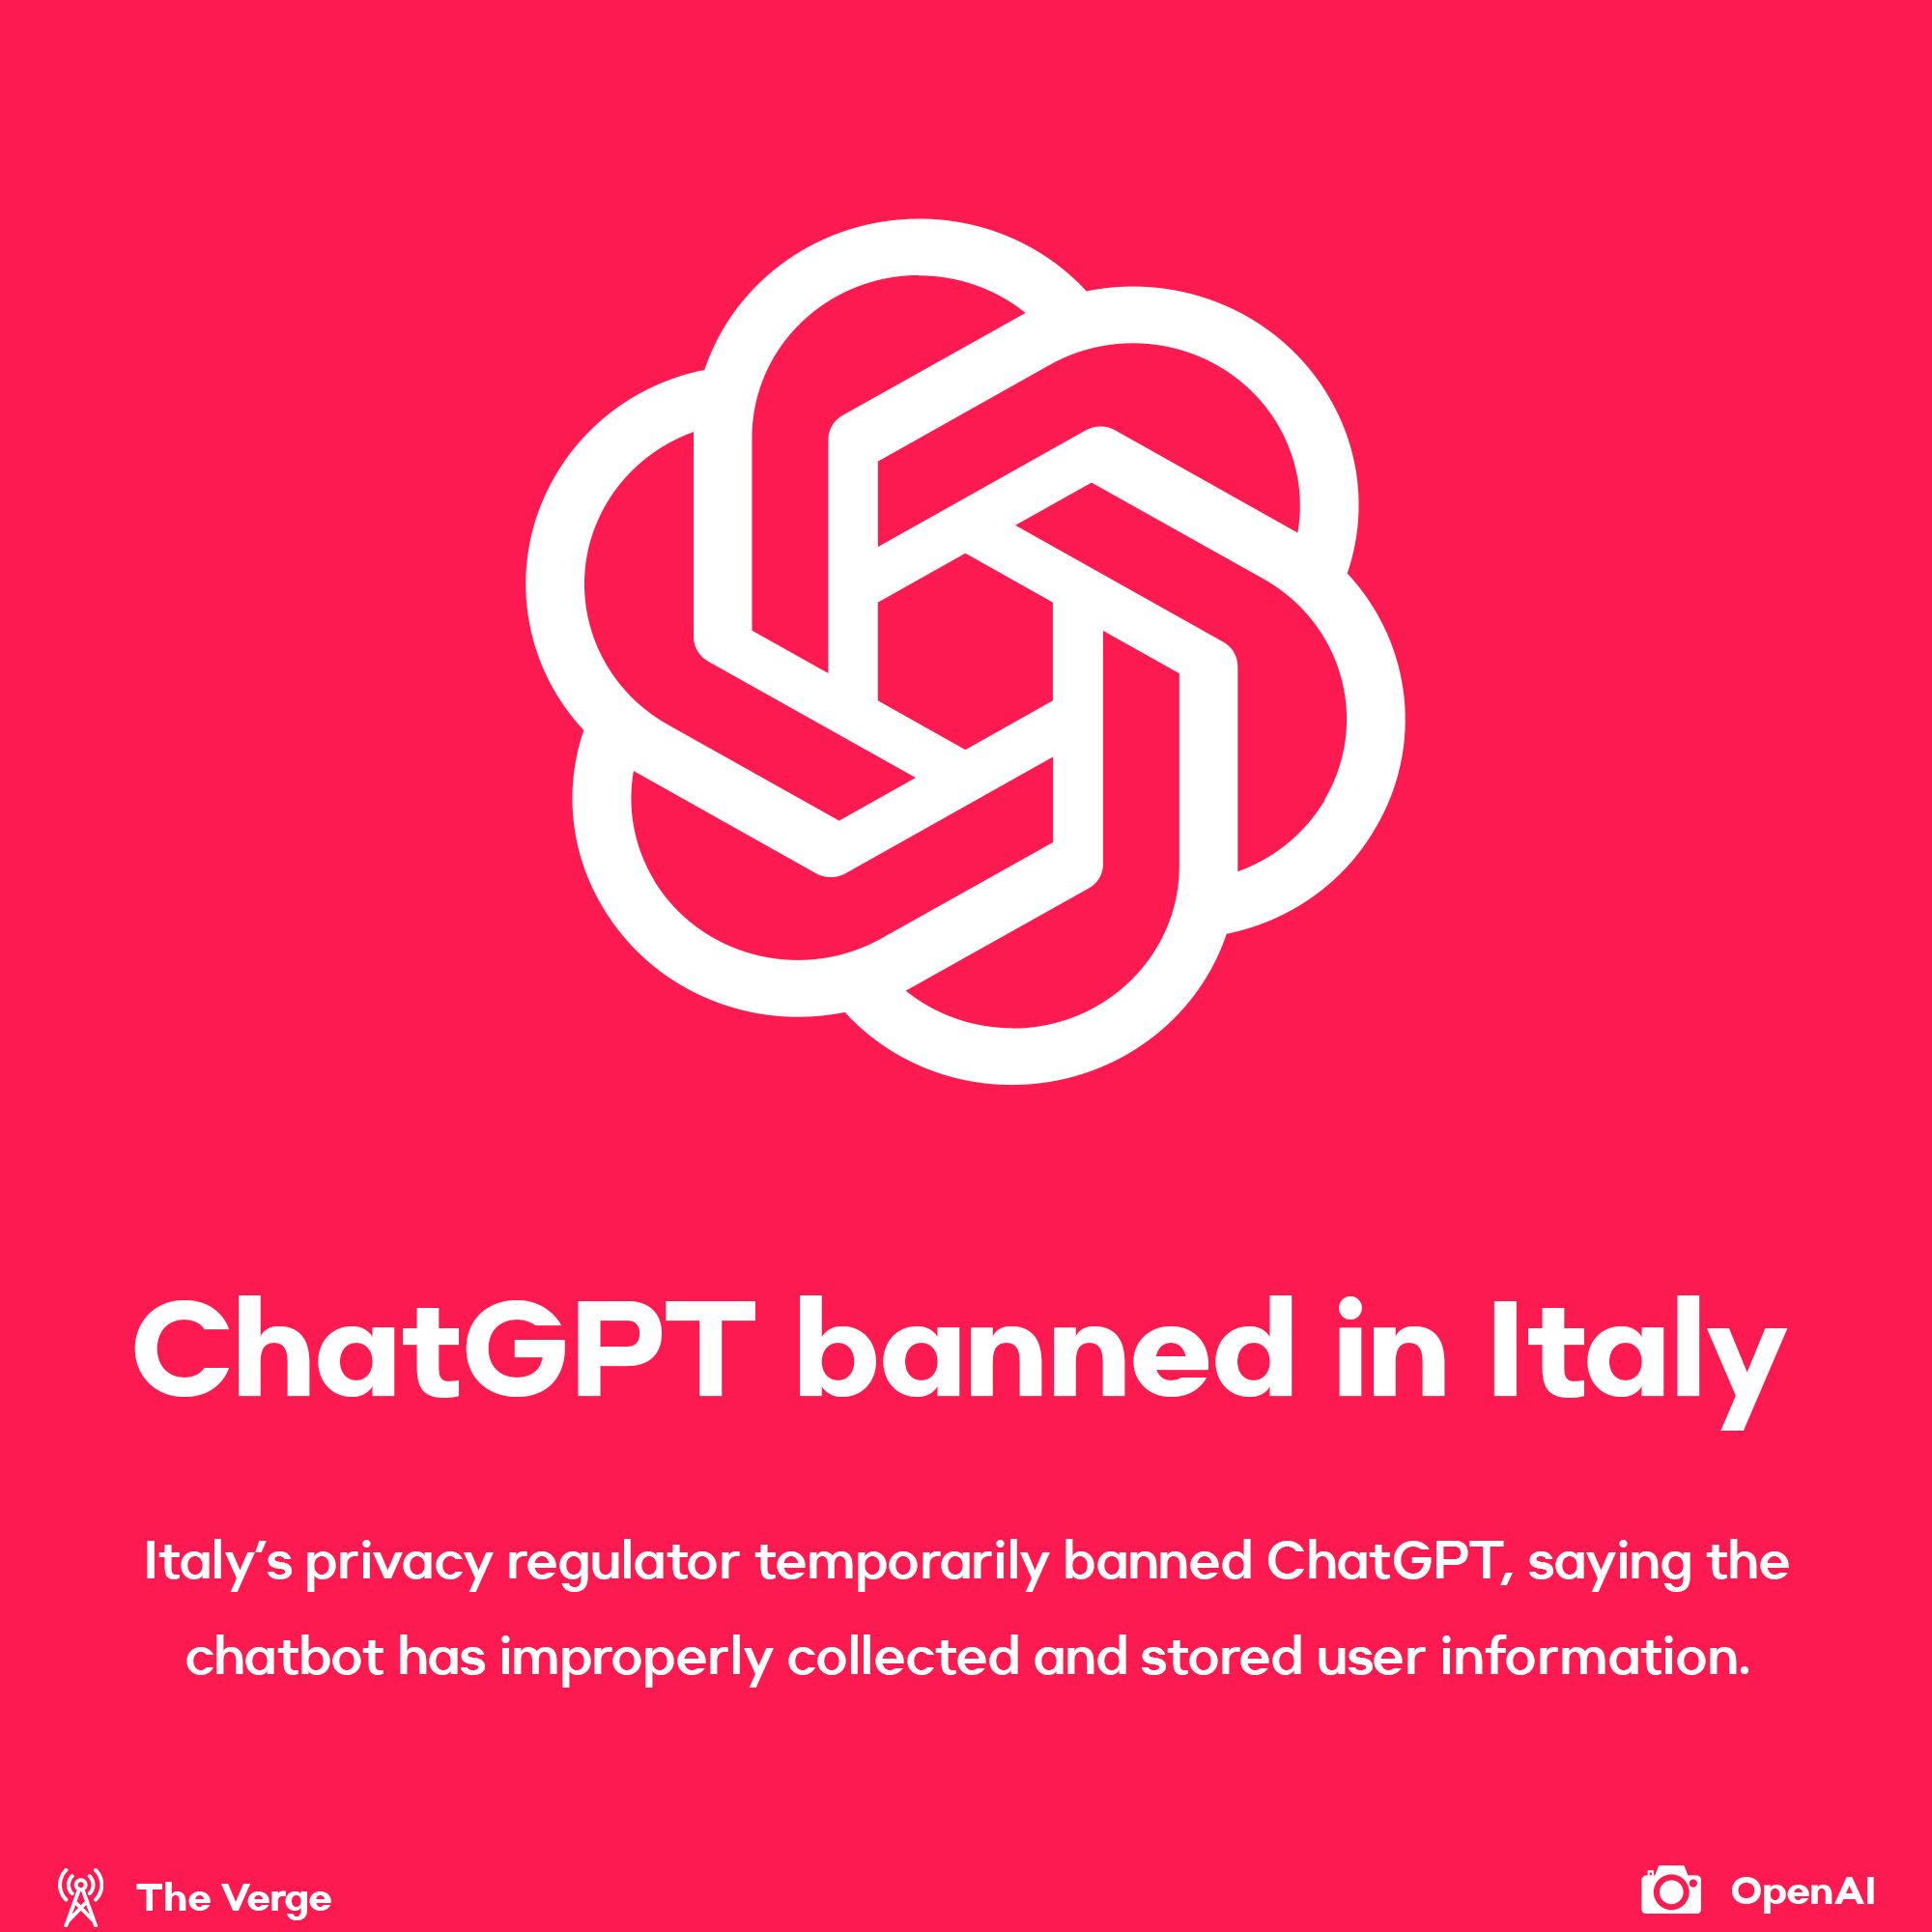 ChatGPT banned in Italy